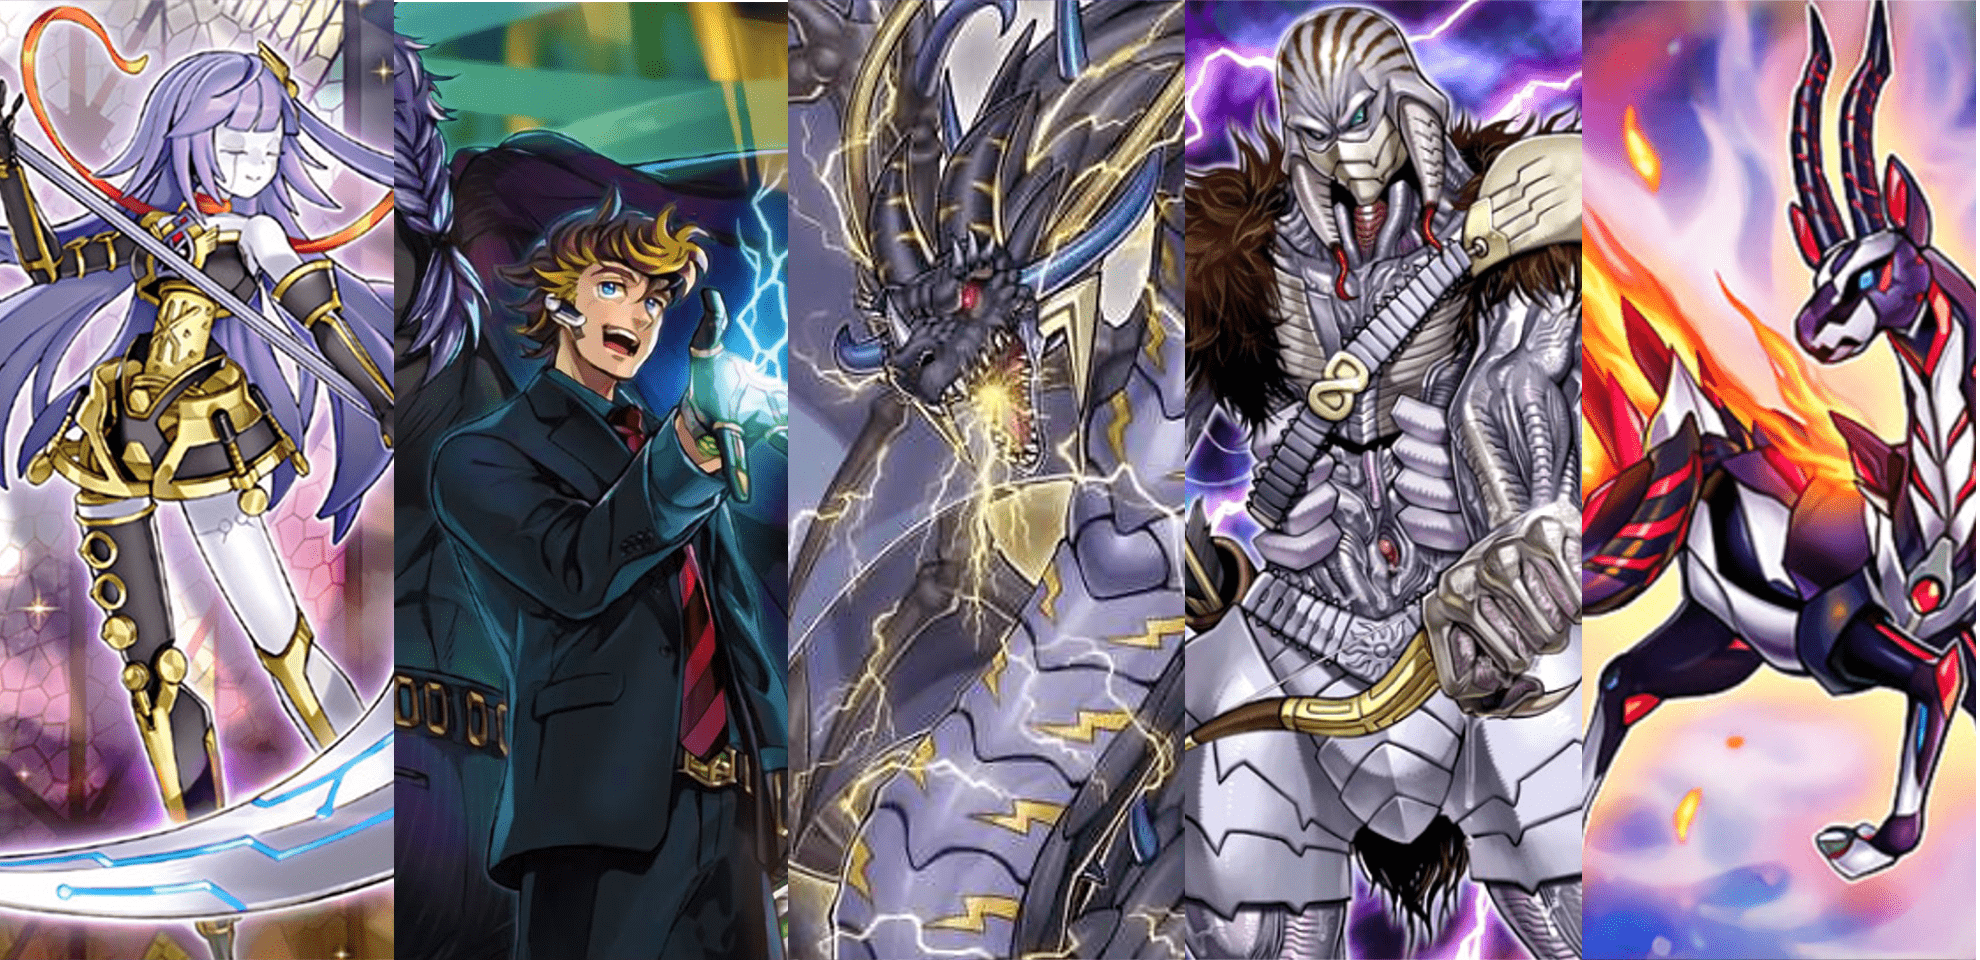 OCG Report #1 - Le Deck Orcust Domine - Octobre 2019